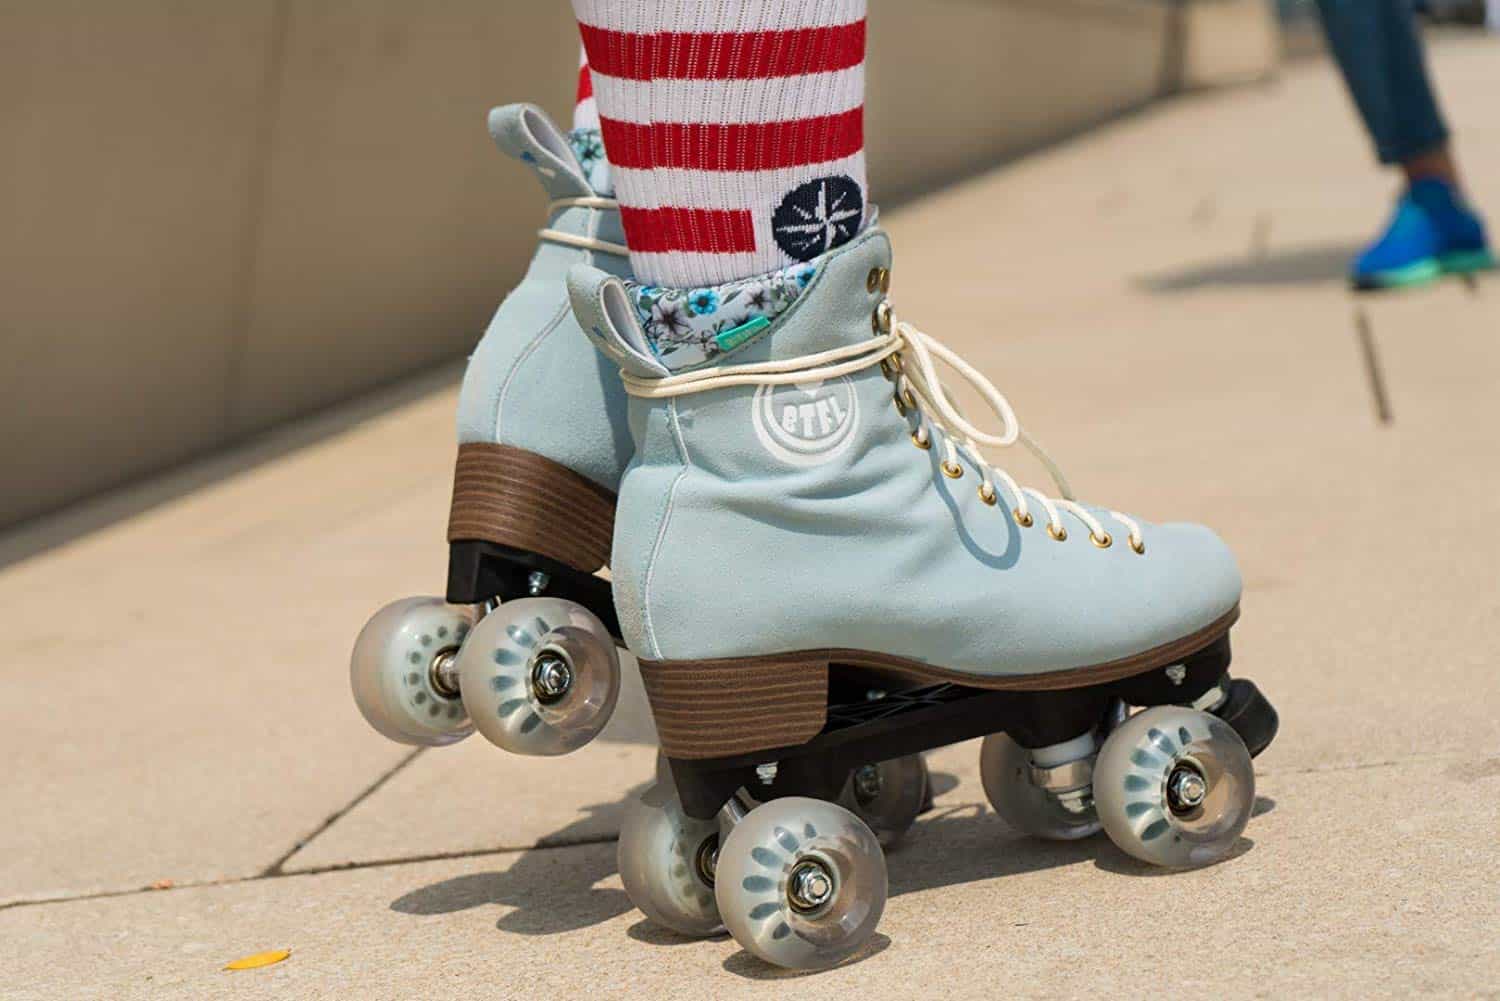 Choosing the Right Roller Skates For You